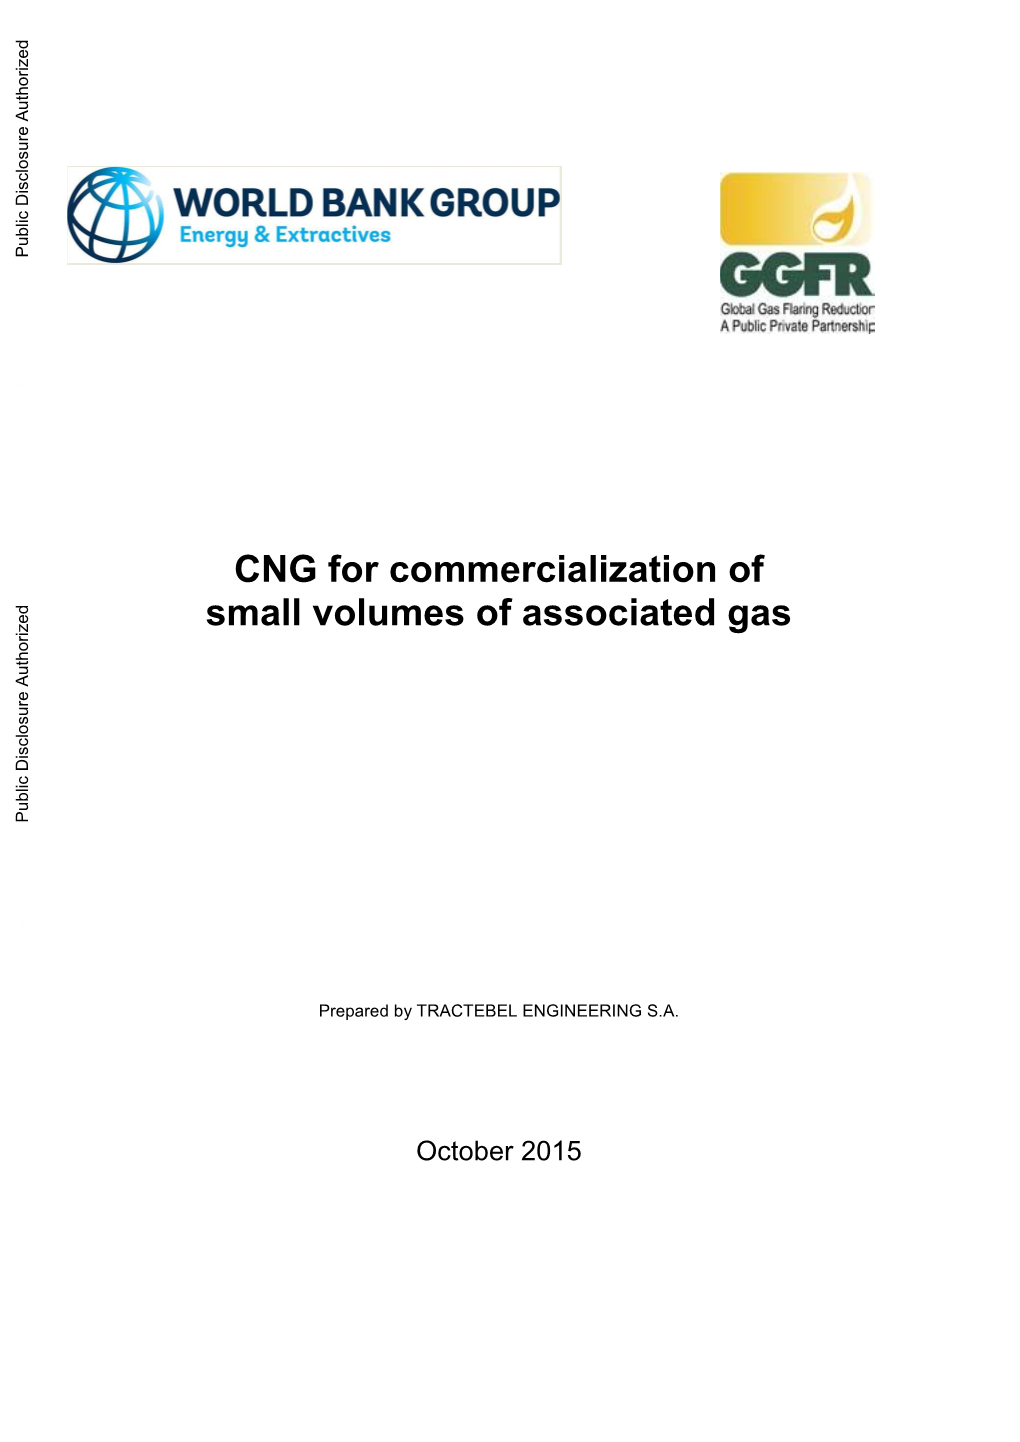 CNG for Commercialization of Small Volumes of Associated Gas